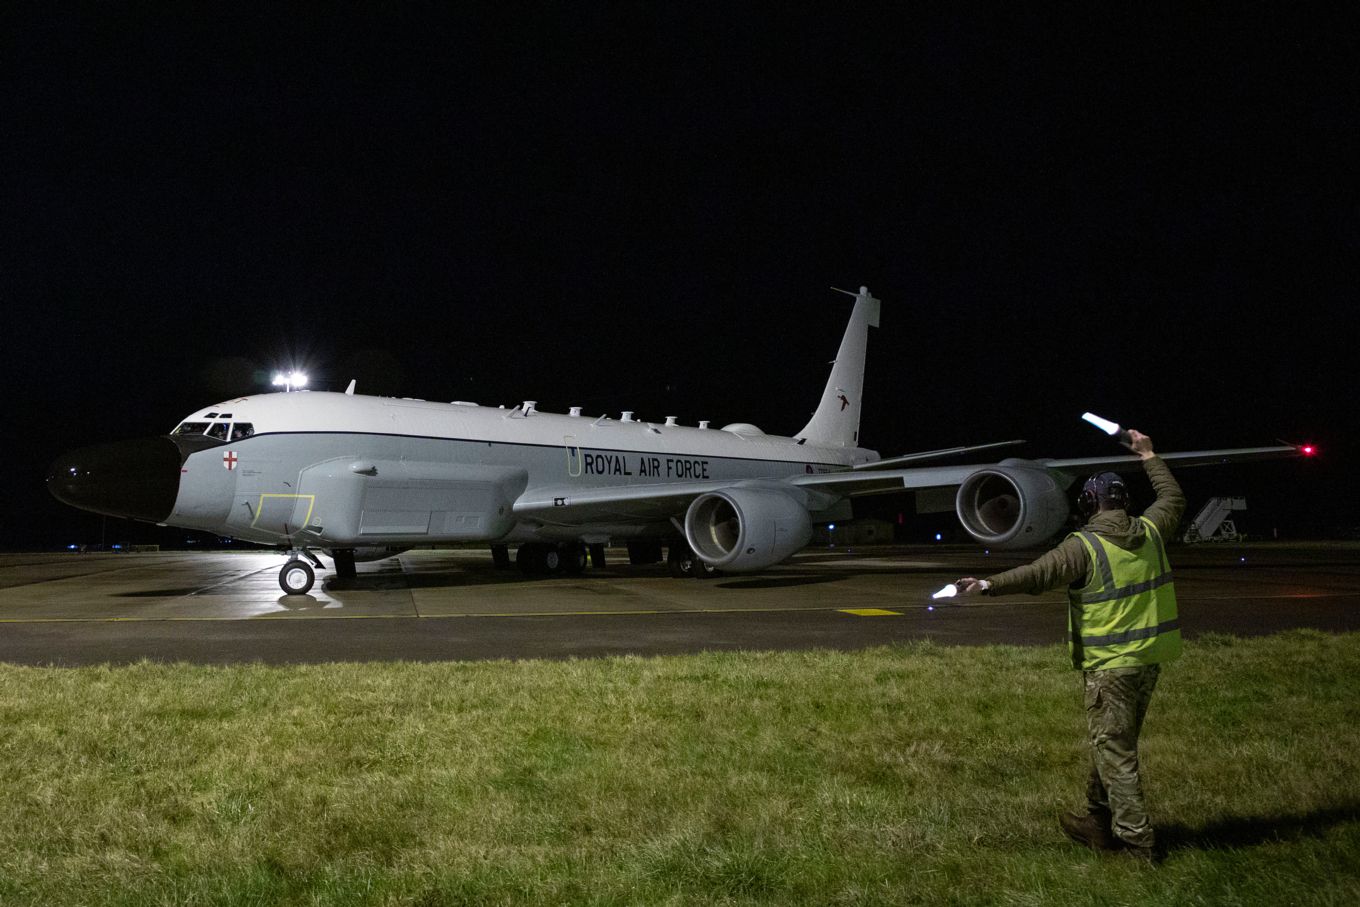 Image shows an RAF Rivet Joint aircraft on the ground at night.